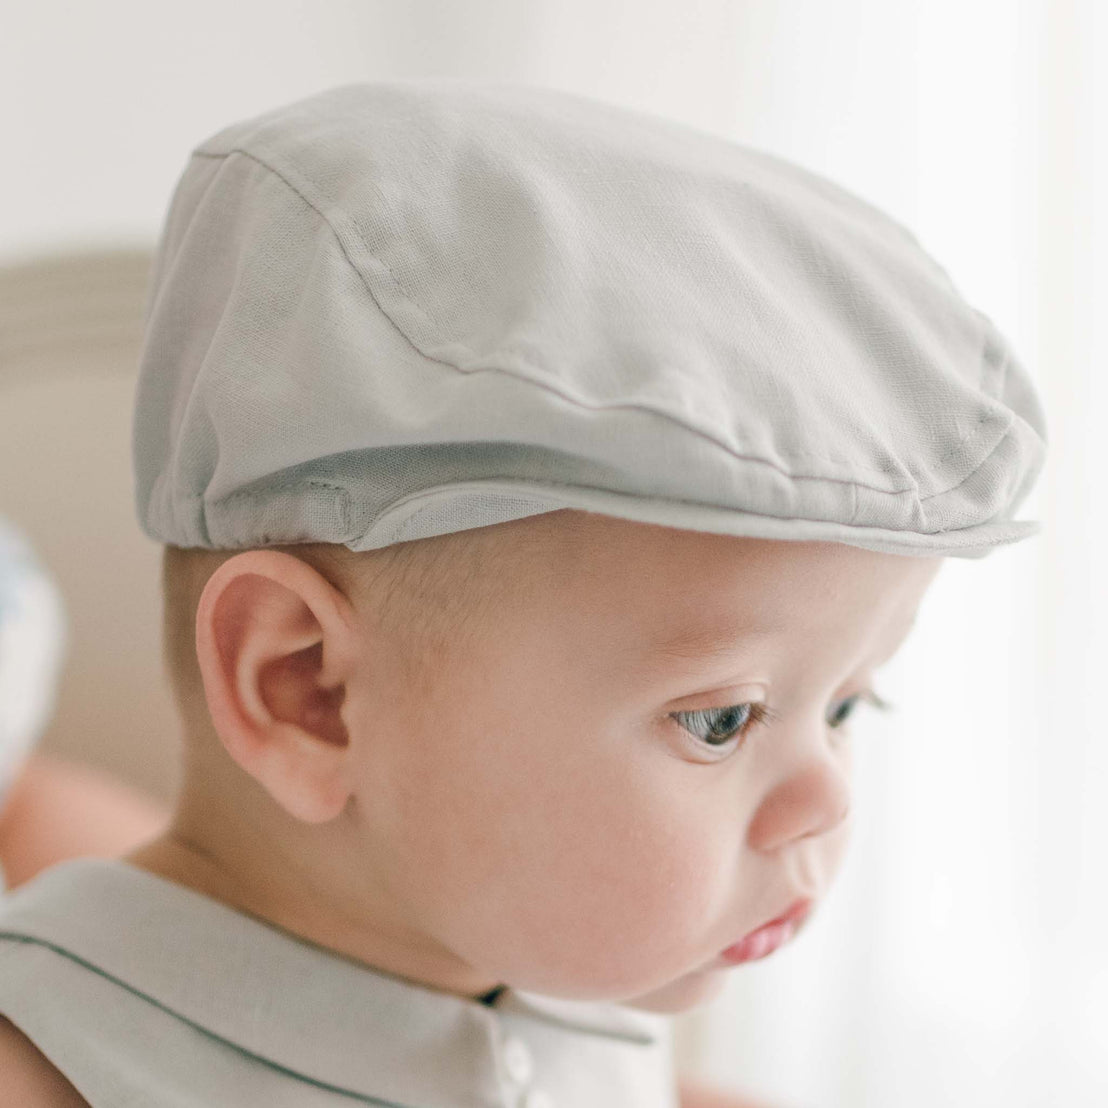 Close-up of a baby wearing a light gray Grayson Linen Newsboy Cap and the matching Linen Romper. The baby is looking downward with a thoughtful expression, and the background is softly blurred, focusing attention on the baby's face and handmade hat.